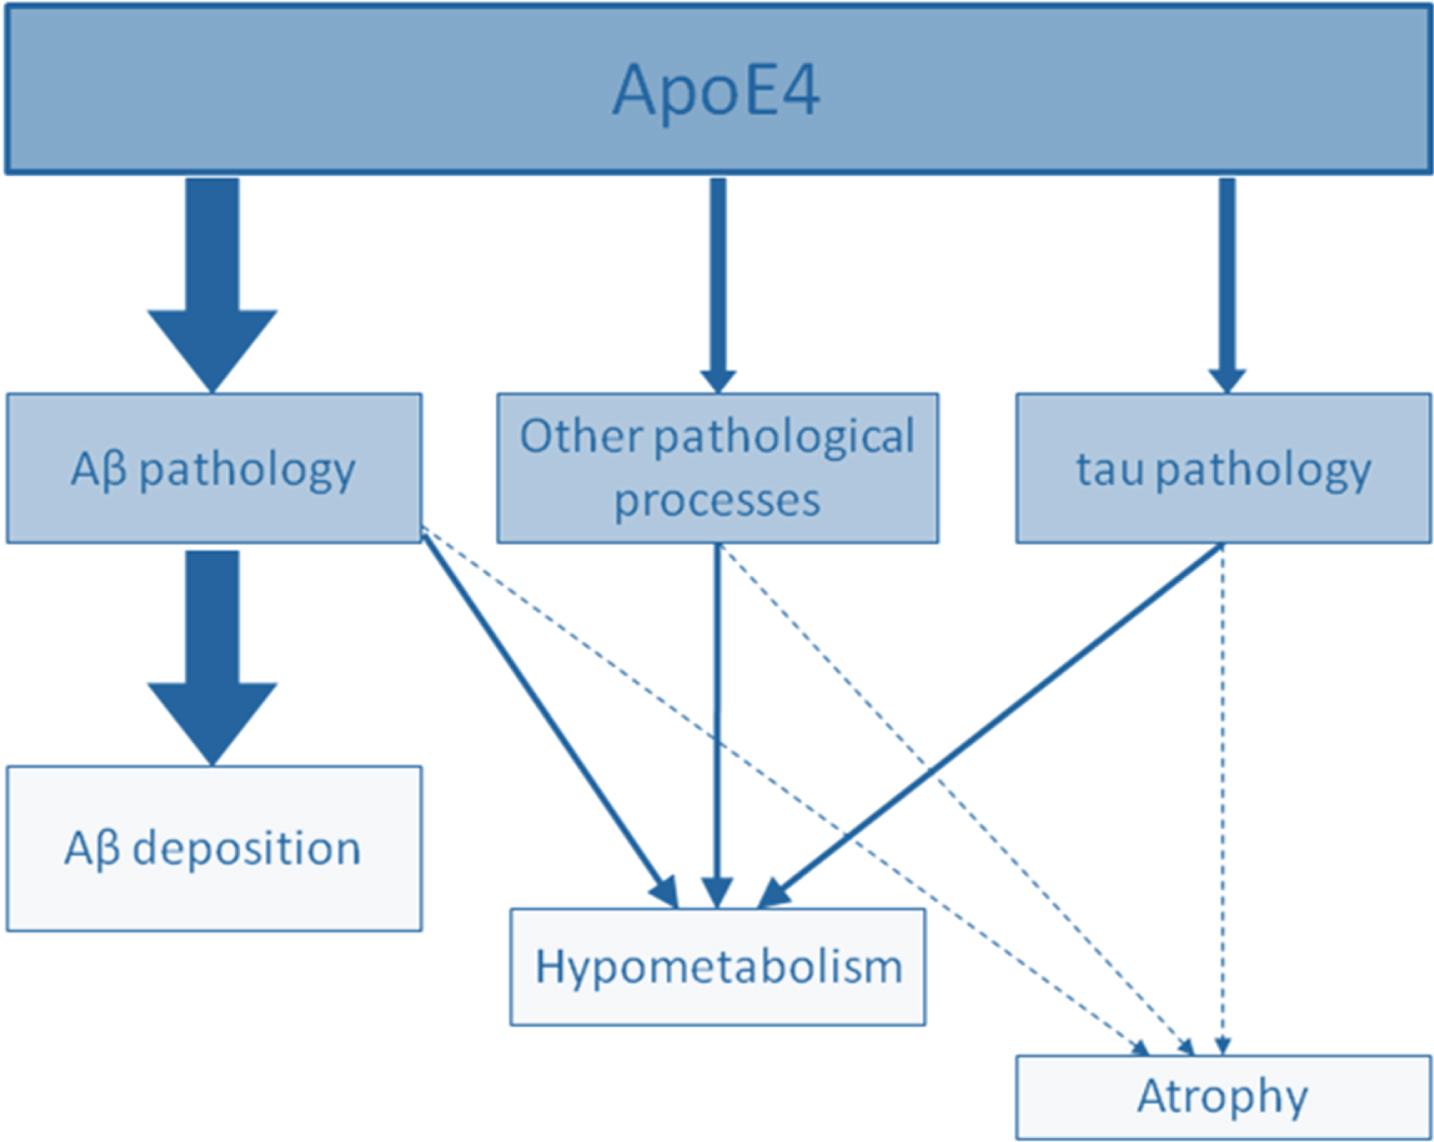 Schematic representation of the graded effect of APOE4 on structural MRI (atrophy), FDG-PET (metabolism), and molecular (Aβ deposition) cortical changes. APOE4 effects clearly predominate on Aβ deposition (thick arrows), while the effects are more modest on cortical metabolism and volume (thin arrows). This figure also illustrates that APOE4 operates through both Aβ-dependent and Aβ-independent processes. From [31].